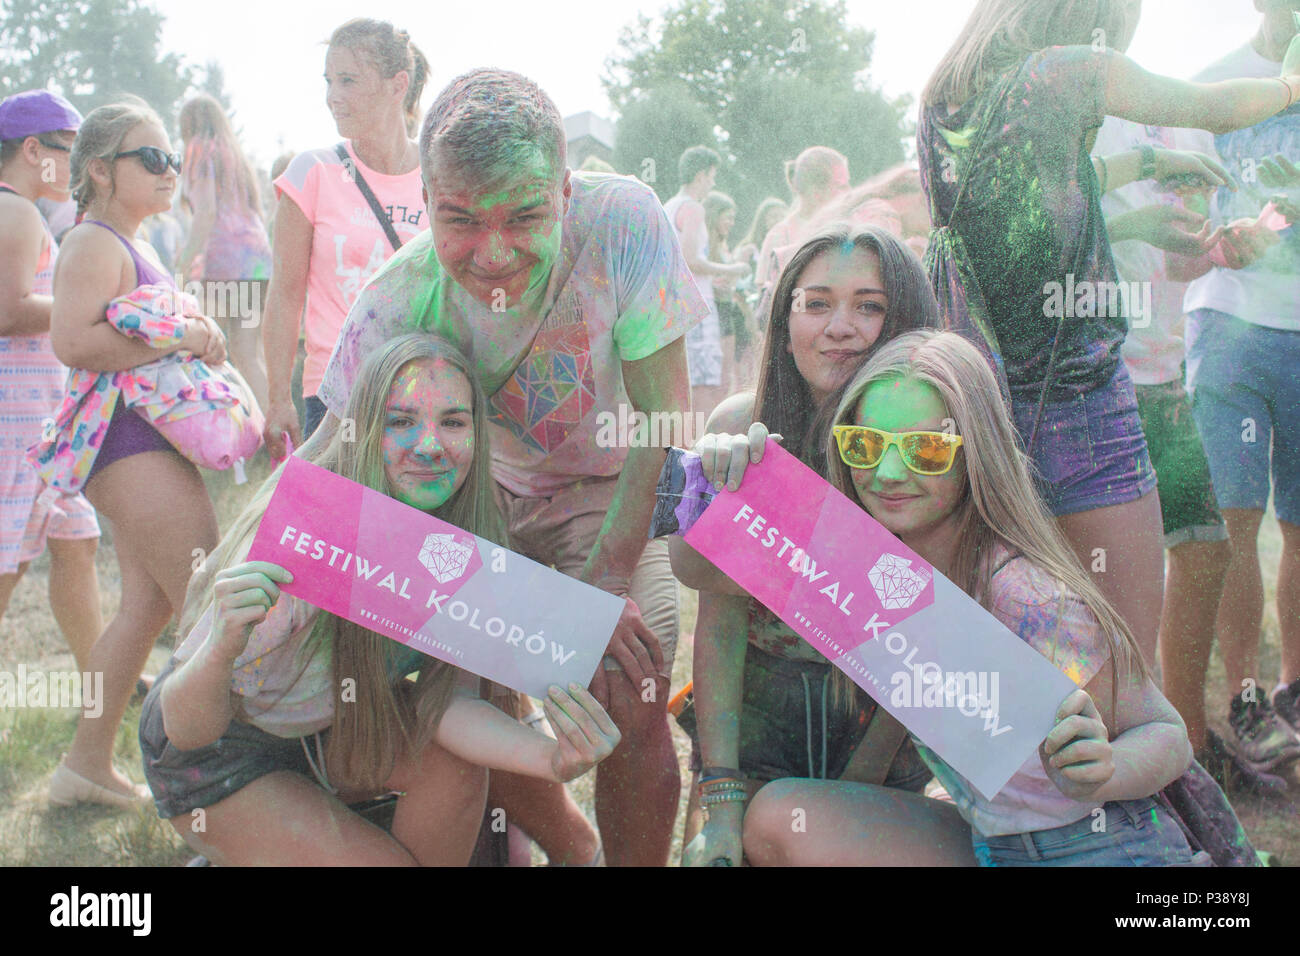 Poznan, Poland. 17th June 2018. Holi - Festival of Colors has spread in recent years in parts of Europe and North America as a celebration of love and colors of spring. Credit: Slawomir Kowalewski / Alamy Live News Stock Photo